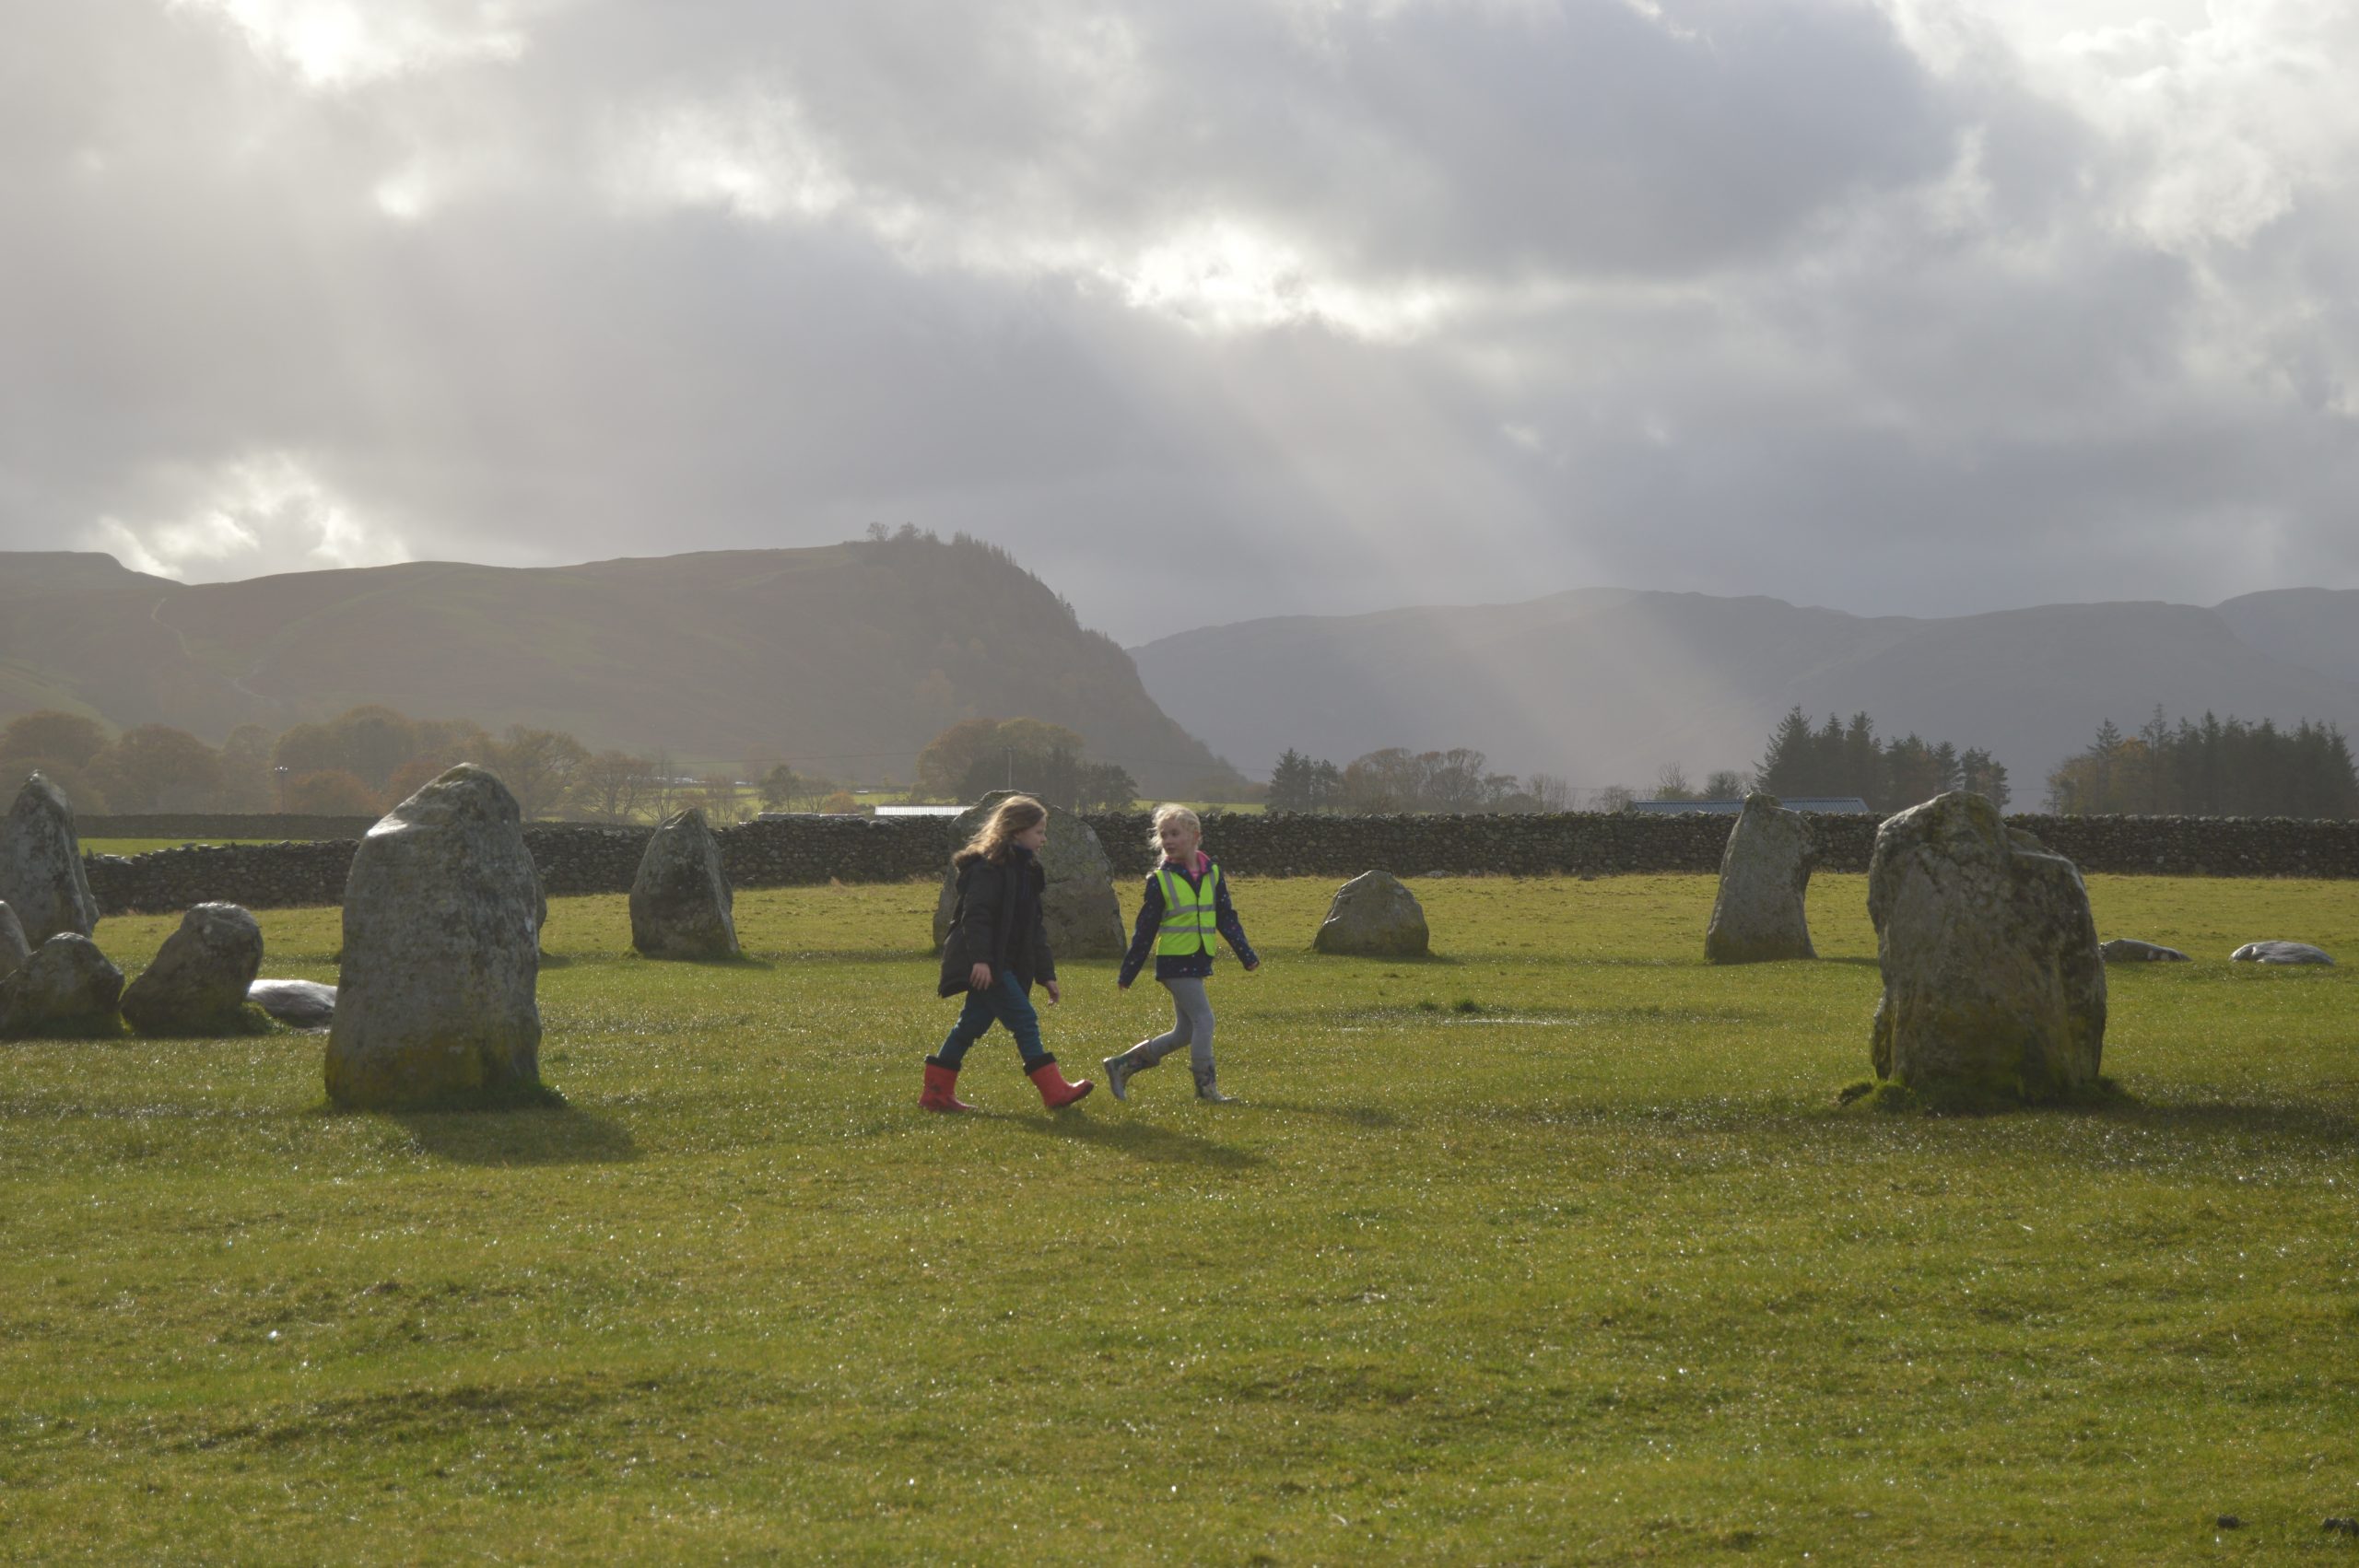 Drumming Ceremony at Castlerigg Sunday 14th November at 12.00pm – All Welcome.